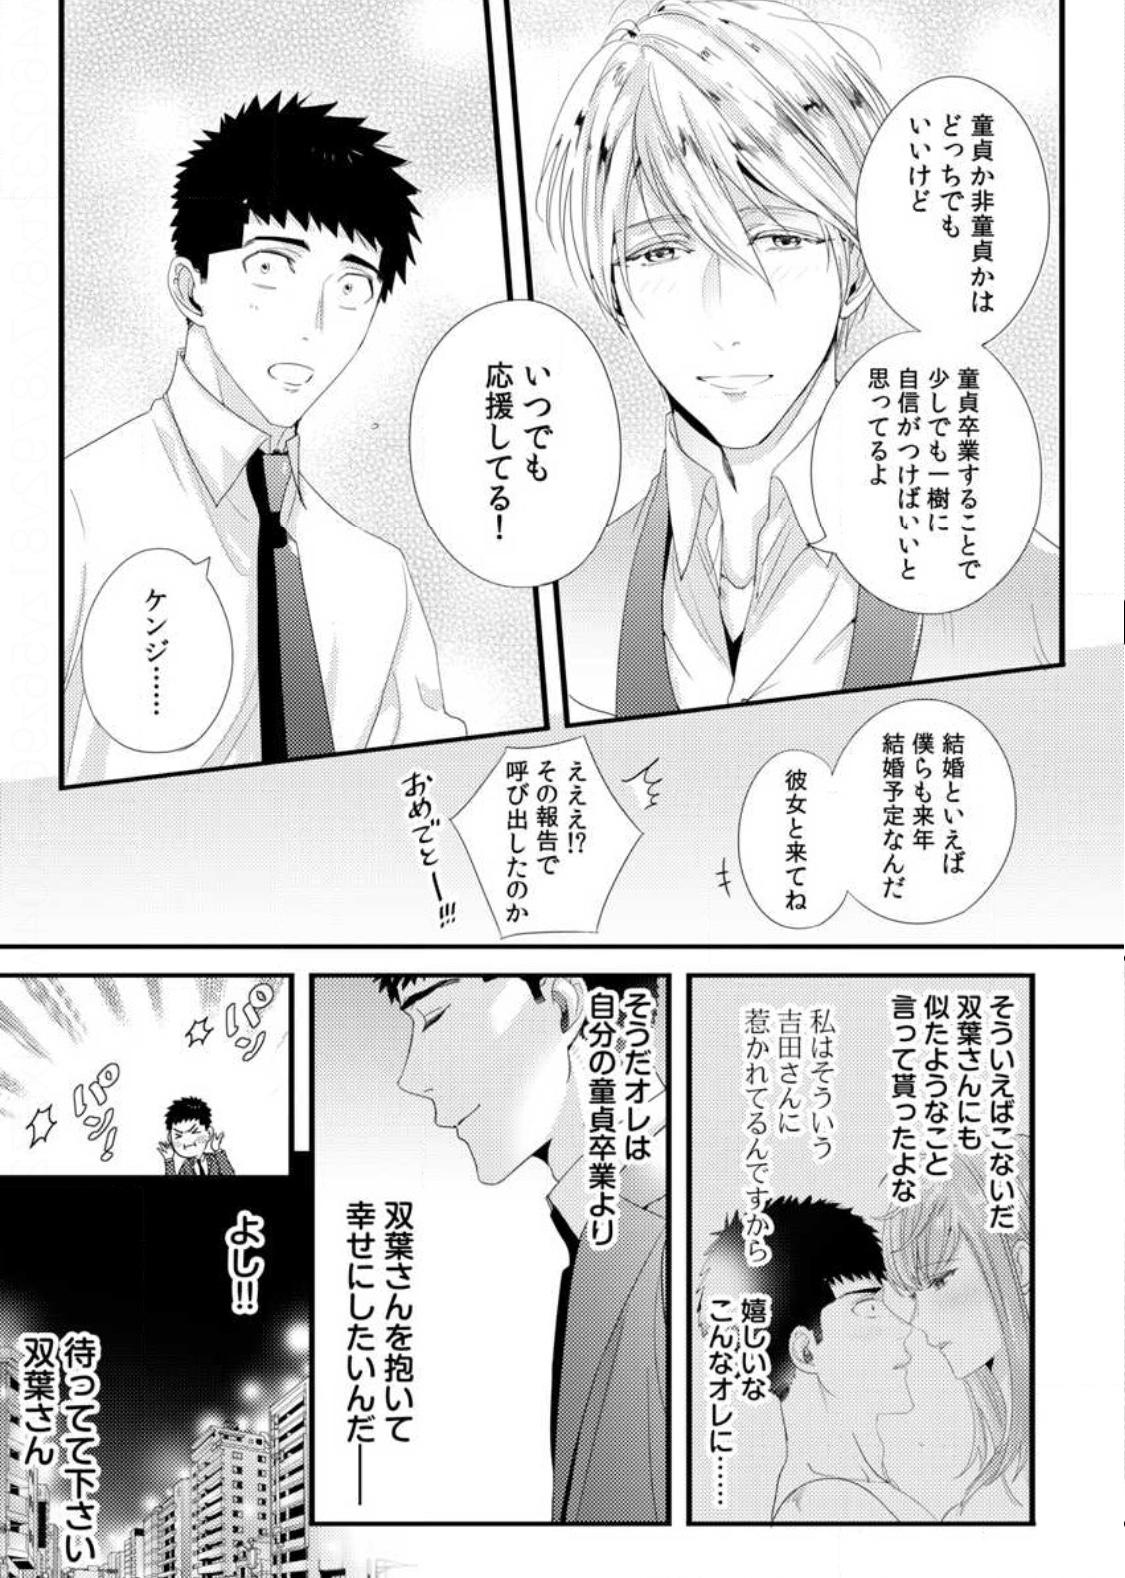 Please Let Me Hold You Futaba-San! Ch. 1-4 87